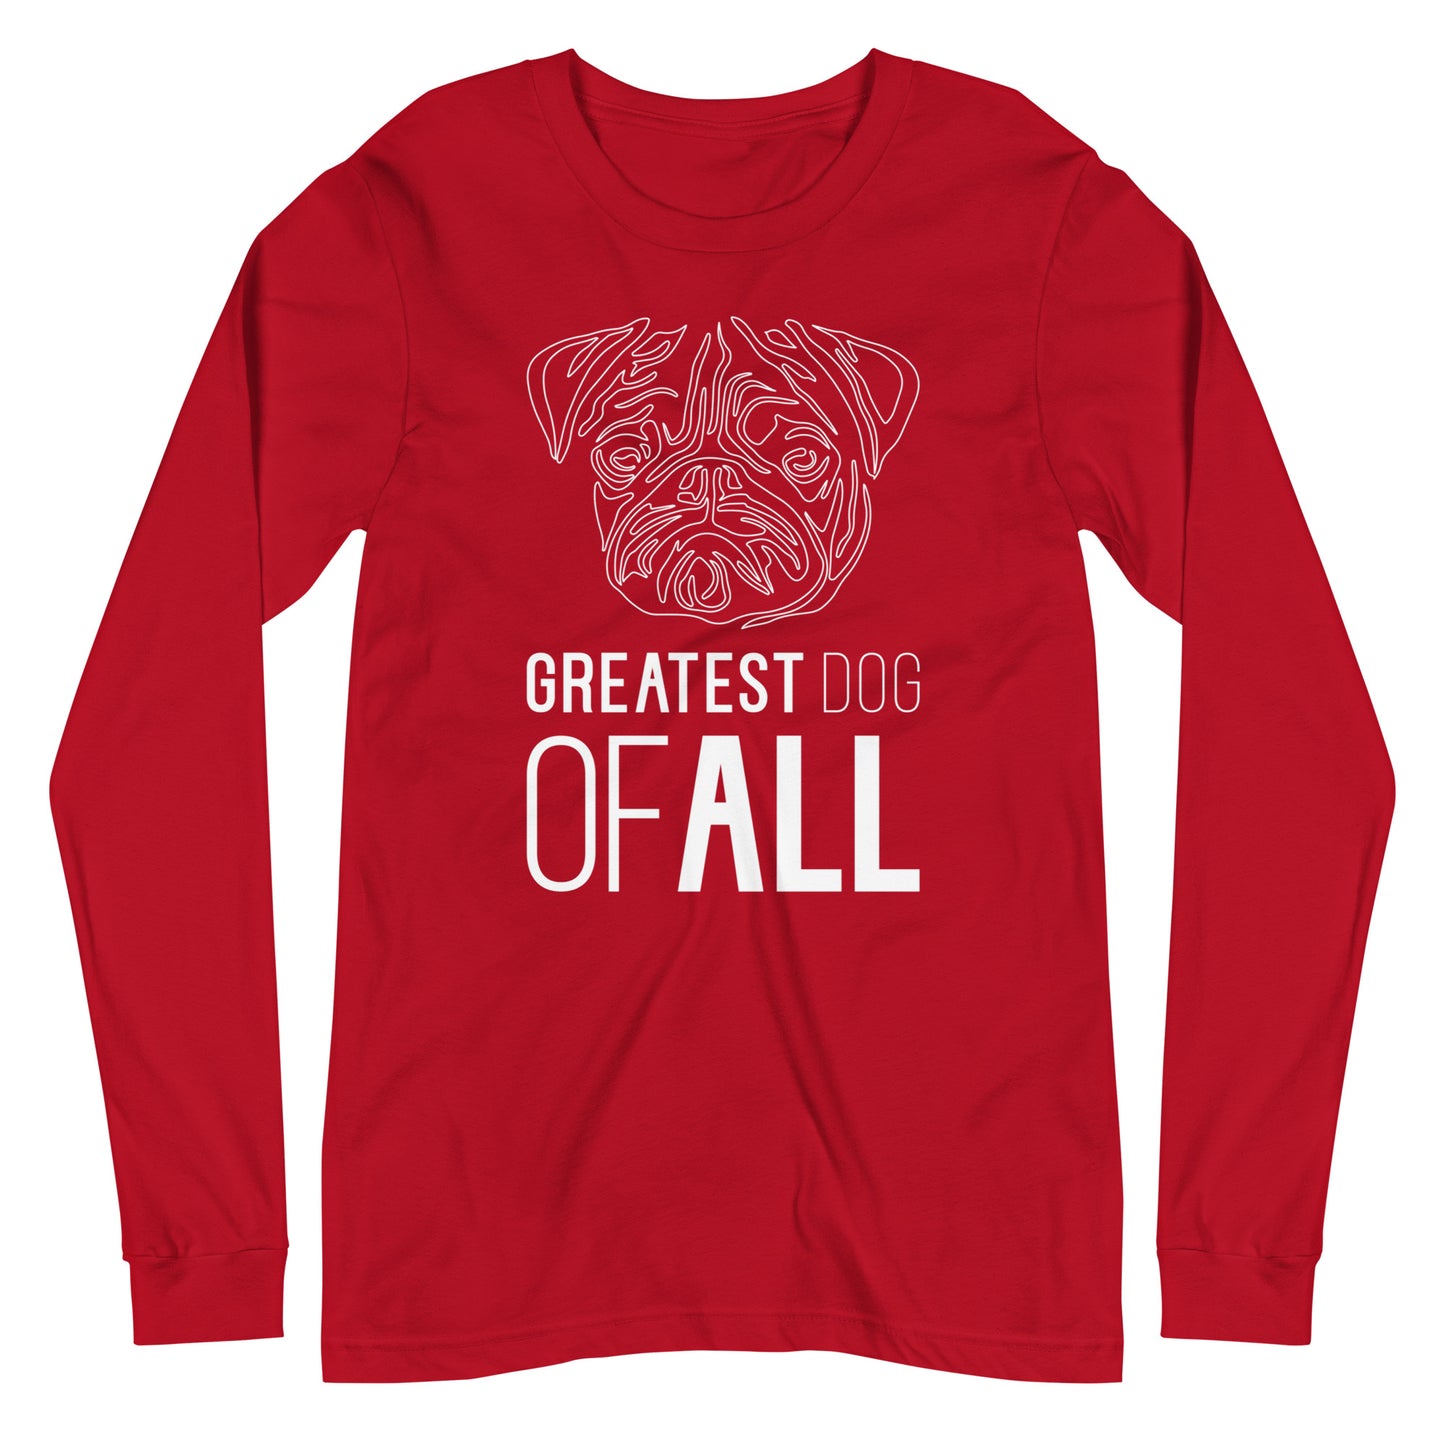 White line Pug face with Greatest Dog of All caption on unisex red long sleeve t-shirt